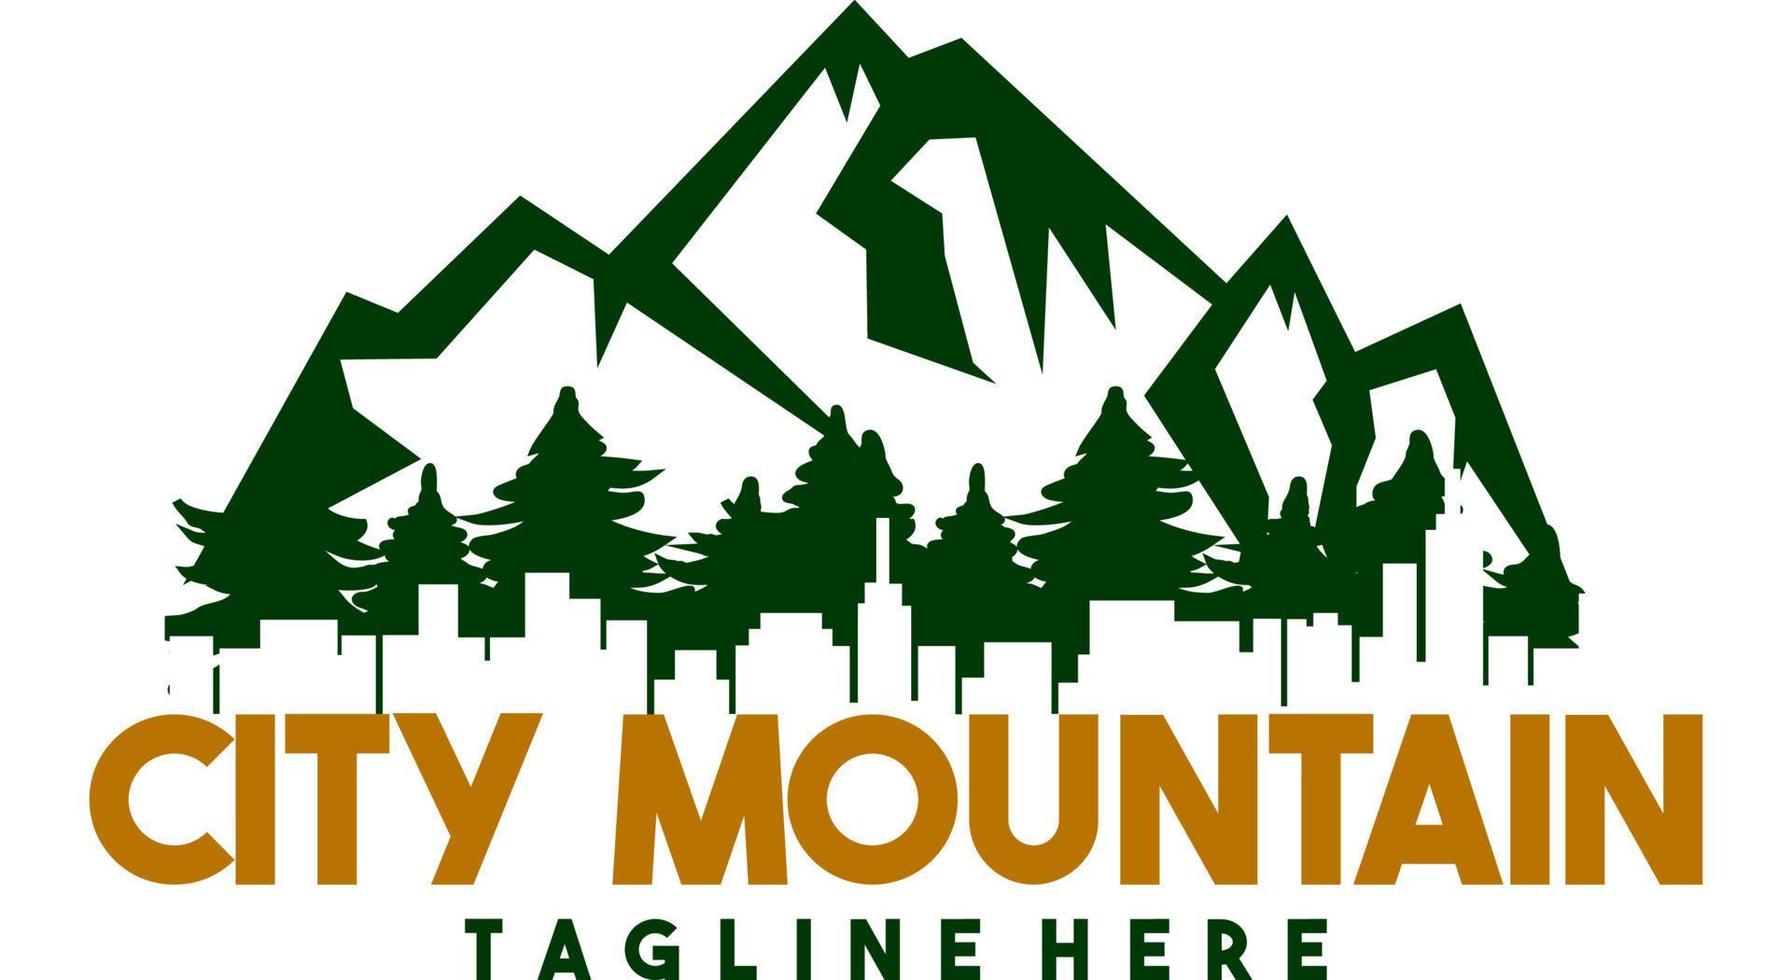 Mountain logo with city and tree silhouettes. Mountain tourism. symbols, logos, labels, flyers. vector